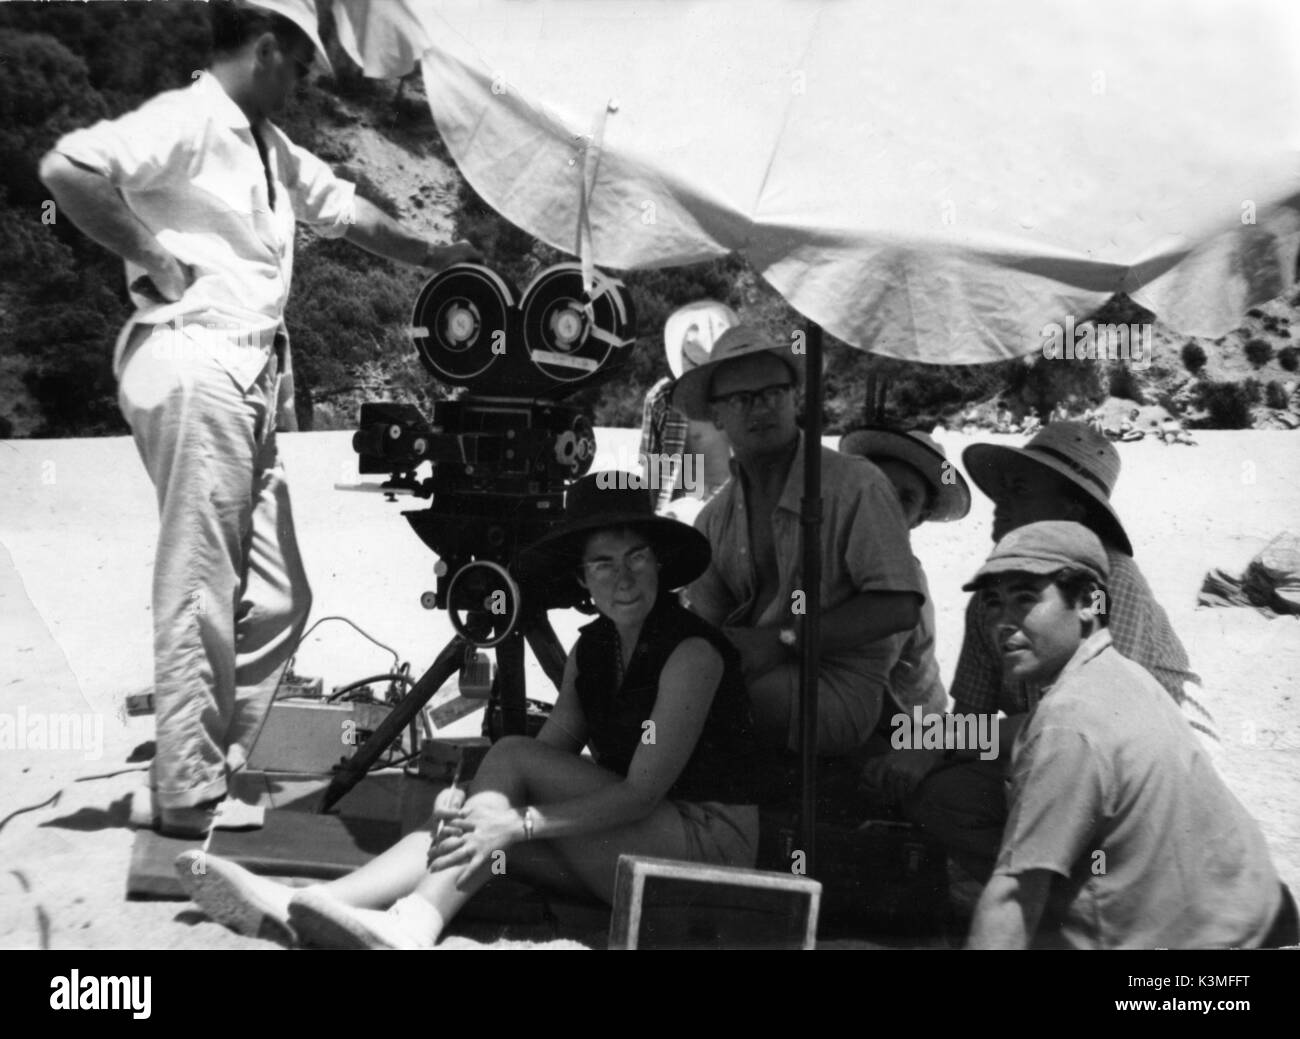 AROUND THE WORLD IN 80 DAYS [US / IT / W GER / YUG 1989] Continuty Girl RENEE GLYNNE [centre] with unidentified film crew     Date: 1989 Stock Photo